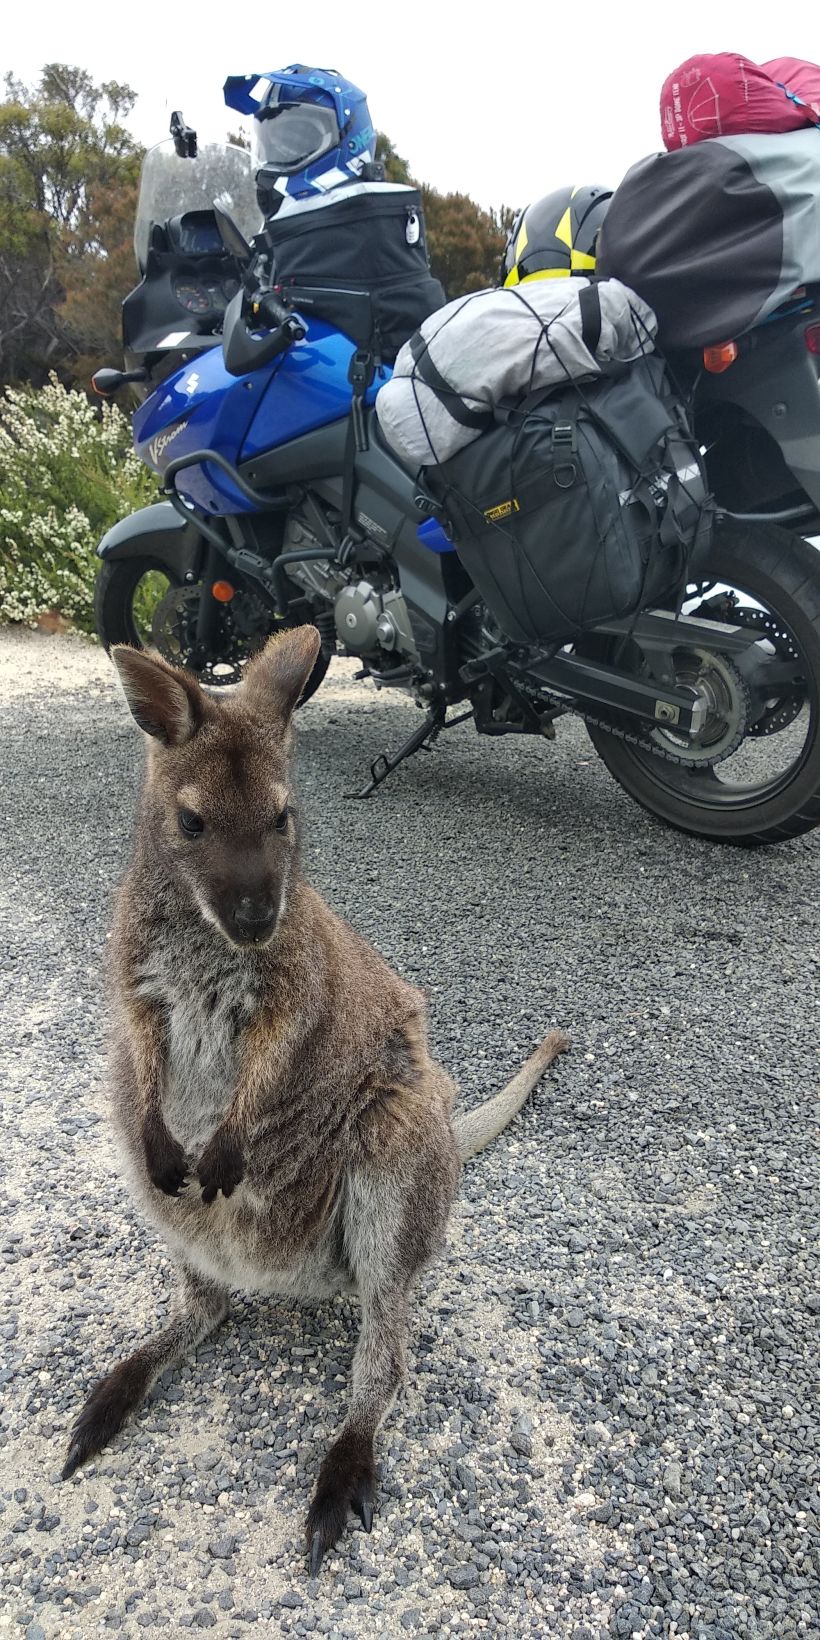 This Little Fella was just hanging around next to our motorbike. So cute !